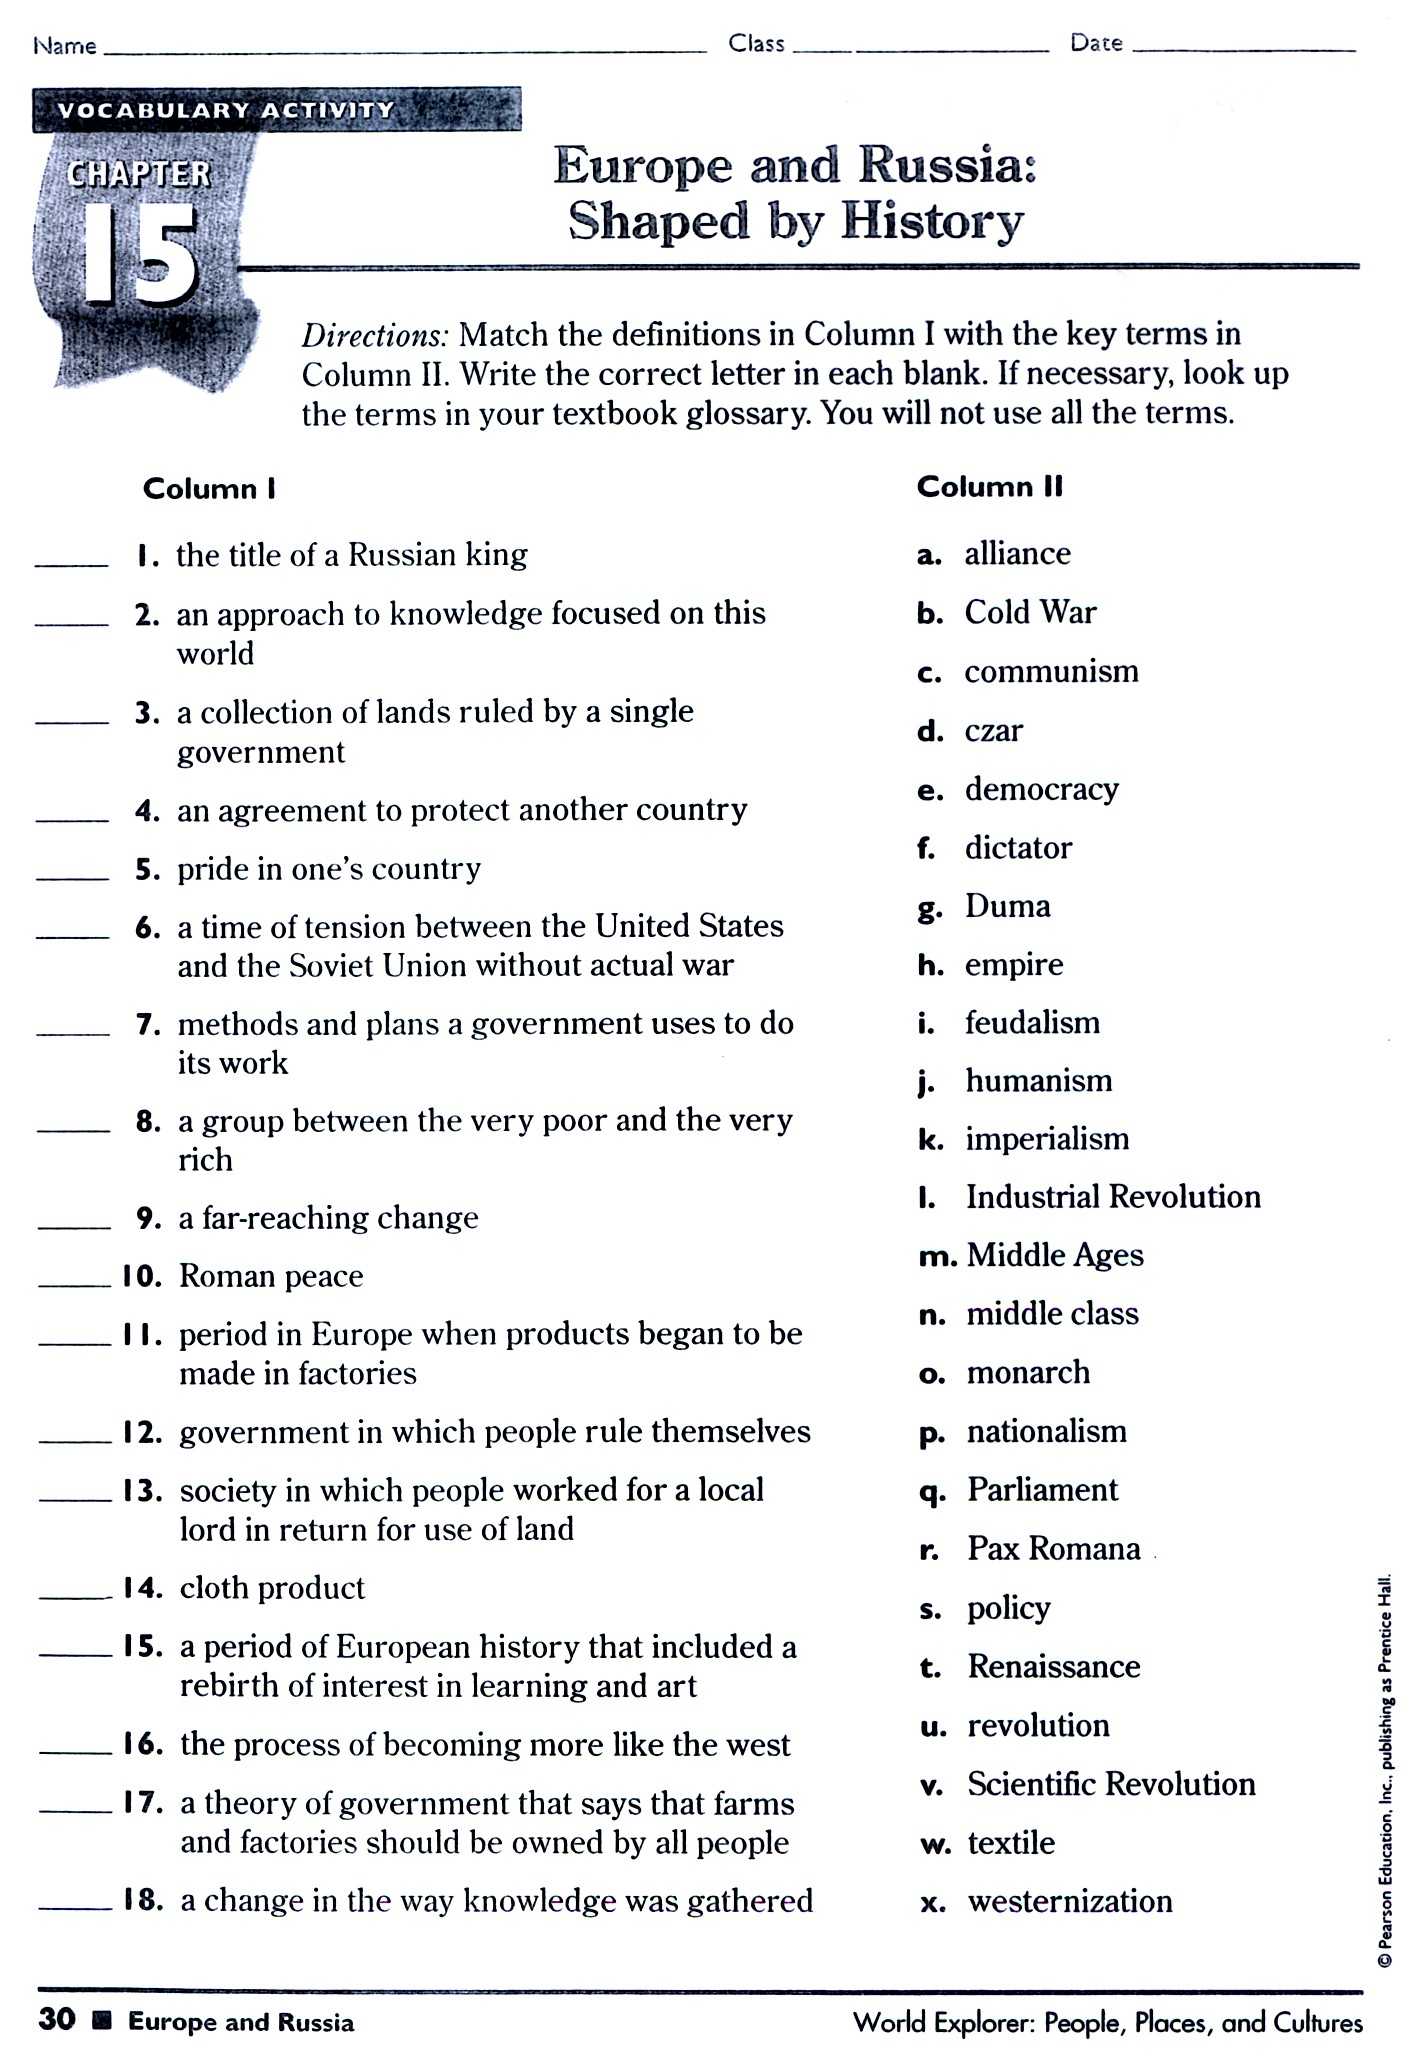 7th Grade English Worksheets Along with 7th Grade Science Worksheets Printable the Best Worksheets Image